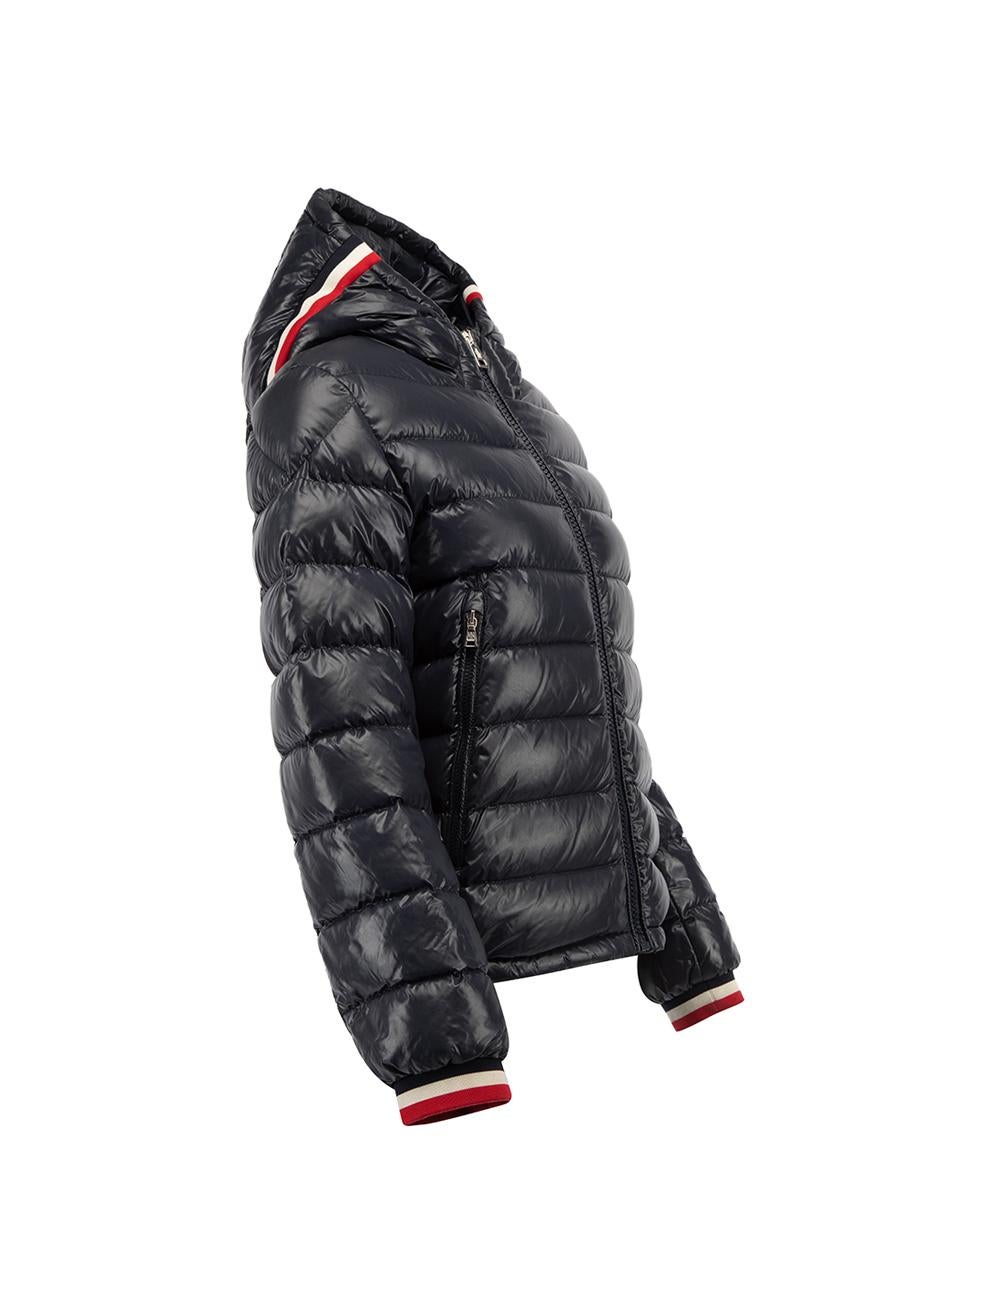 CONDITION is Very good. Minimal wear to jacket is evident. Loose threads found on exterior stitching is seen on this used Moncler designer resale item. Details Navy Nylon Short puffer jacket Hooded Red, white and navy trimmings Front zip closure 2x